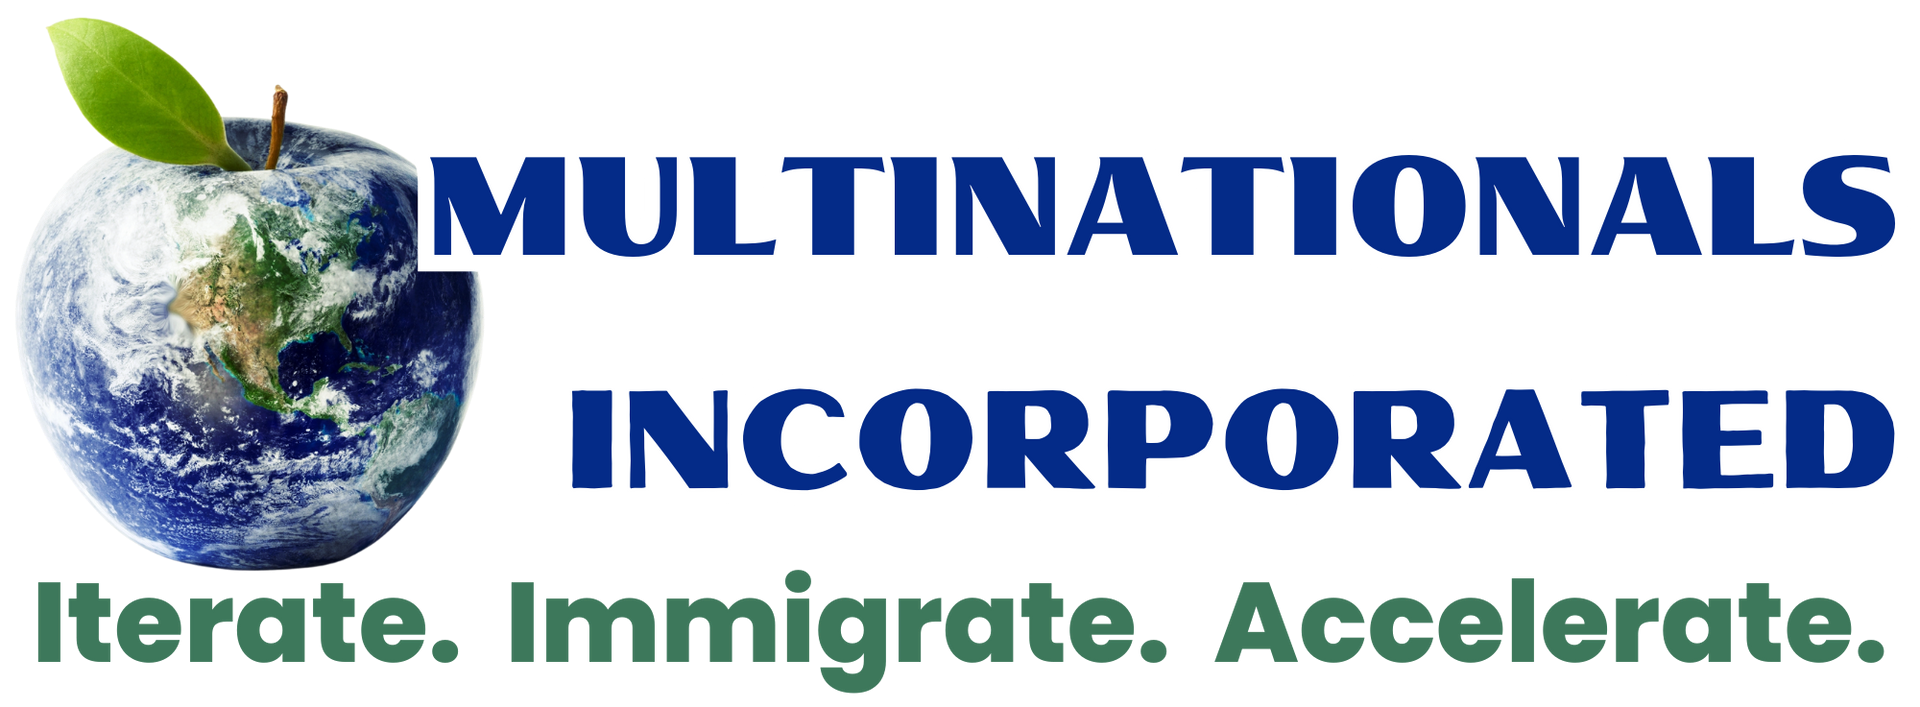 a logo for multinationals incorporated with a picture of the earth